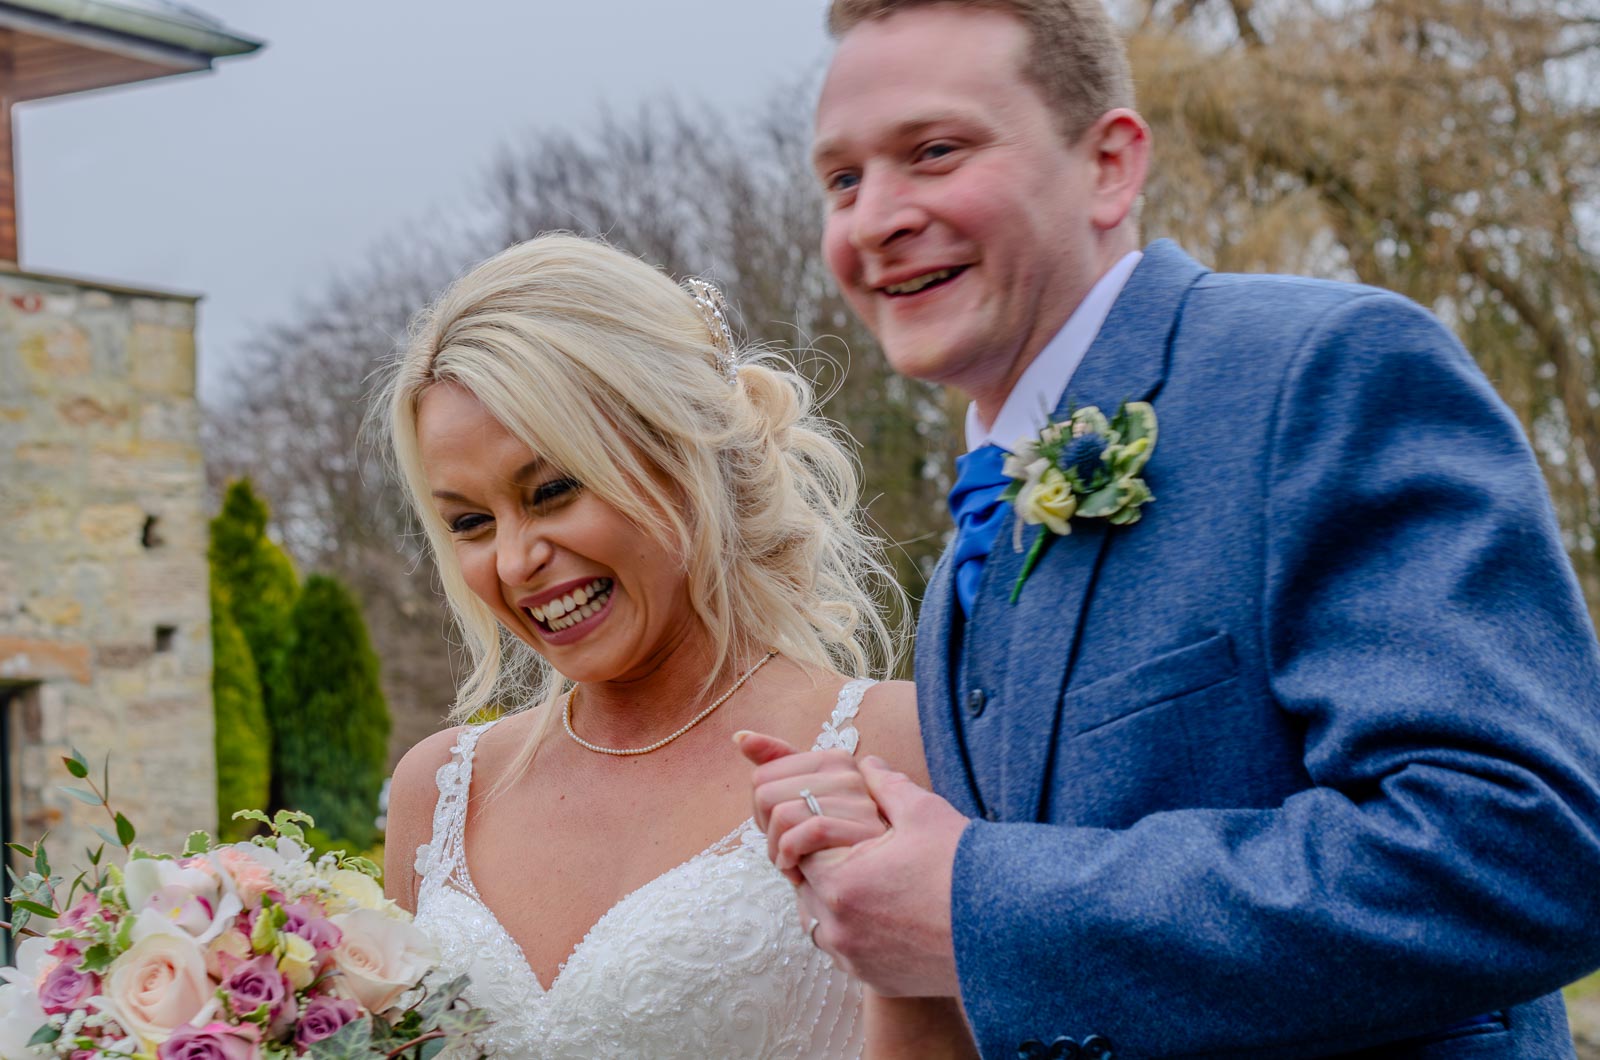 Lewis and Eilidh smile after their wedding.